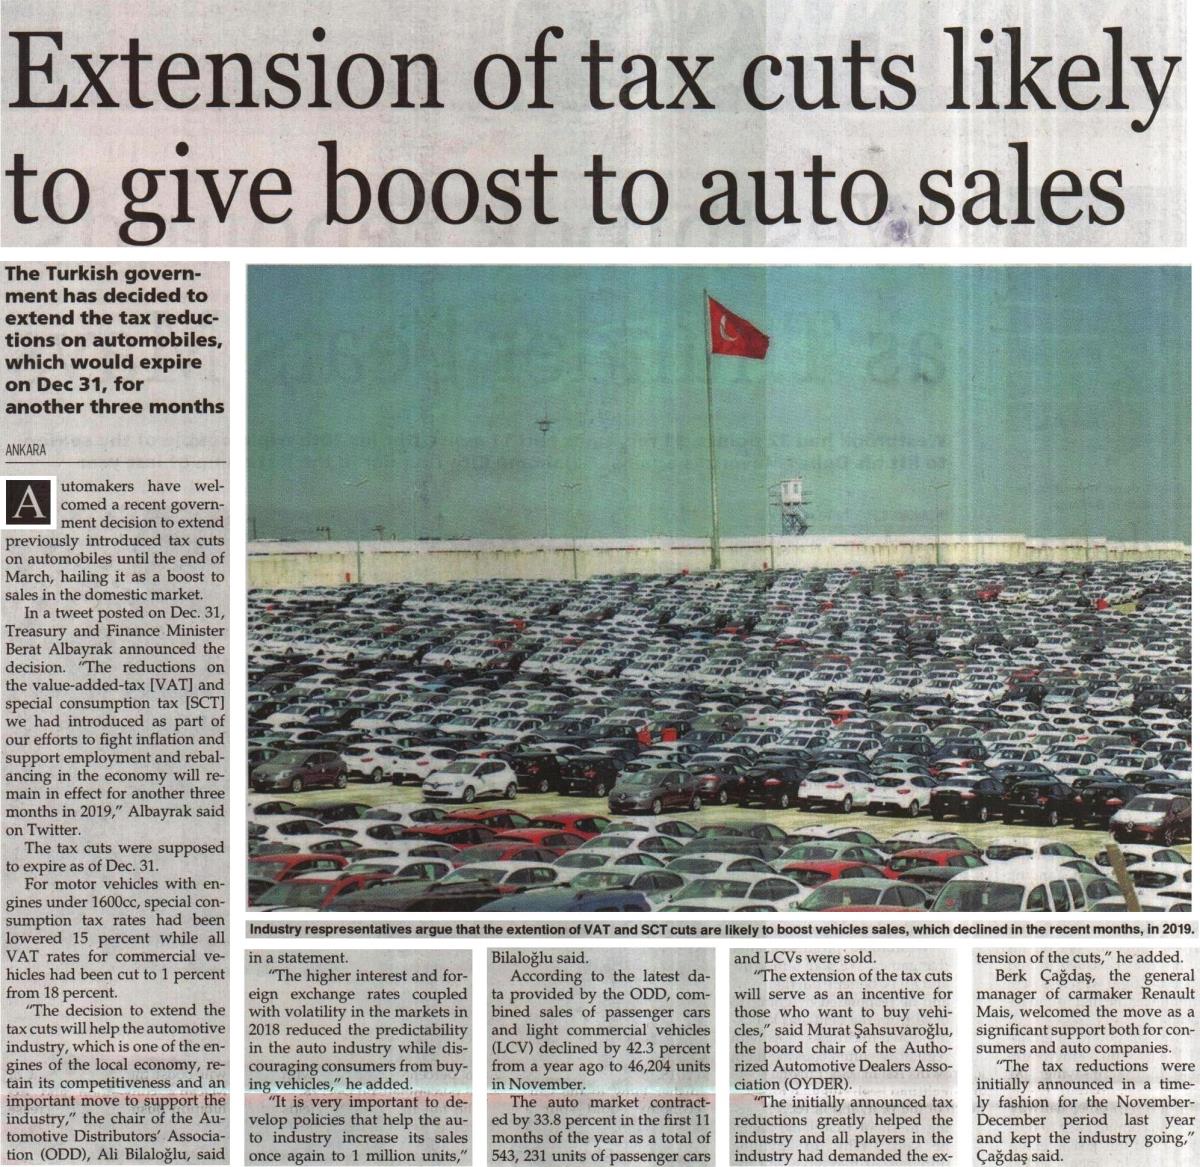 EXTENSİON OF TAX CUTS LİKELY TO GİVE BOOST TO AUTO SALES